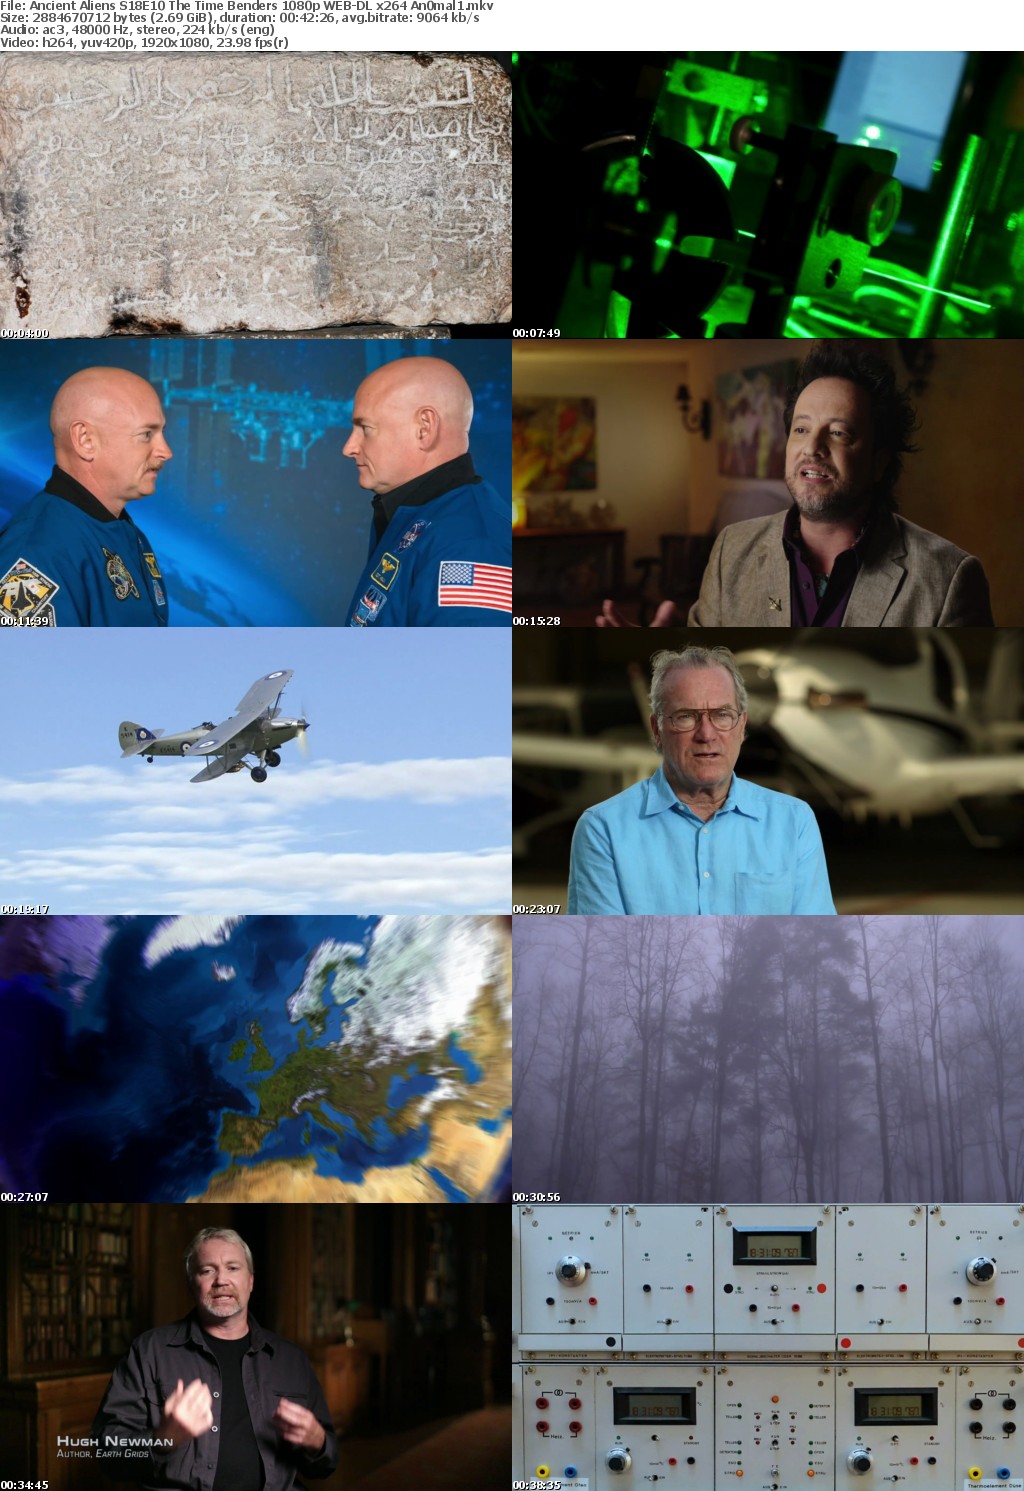 Ancient Aliens S18E10 The Time Benders 1080p WEB-DL x264 An0mal1